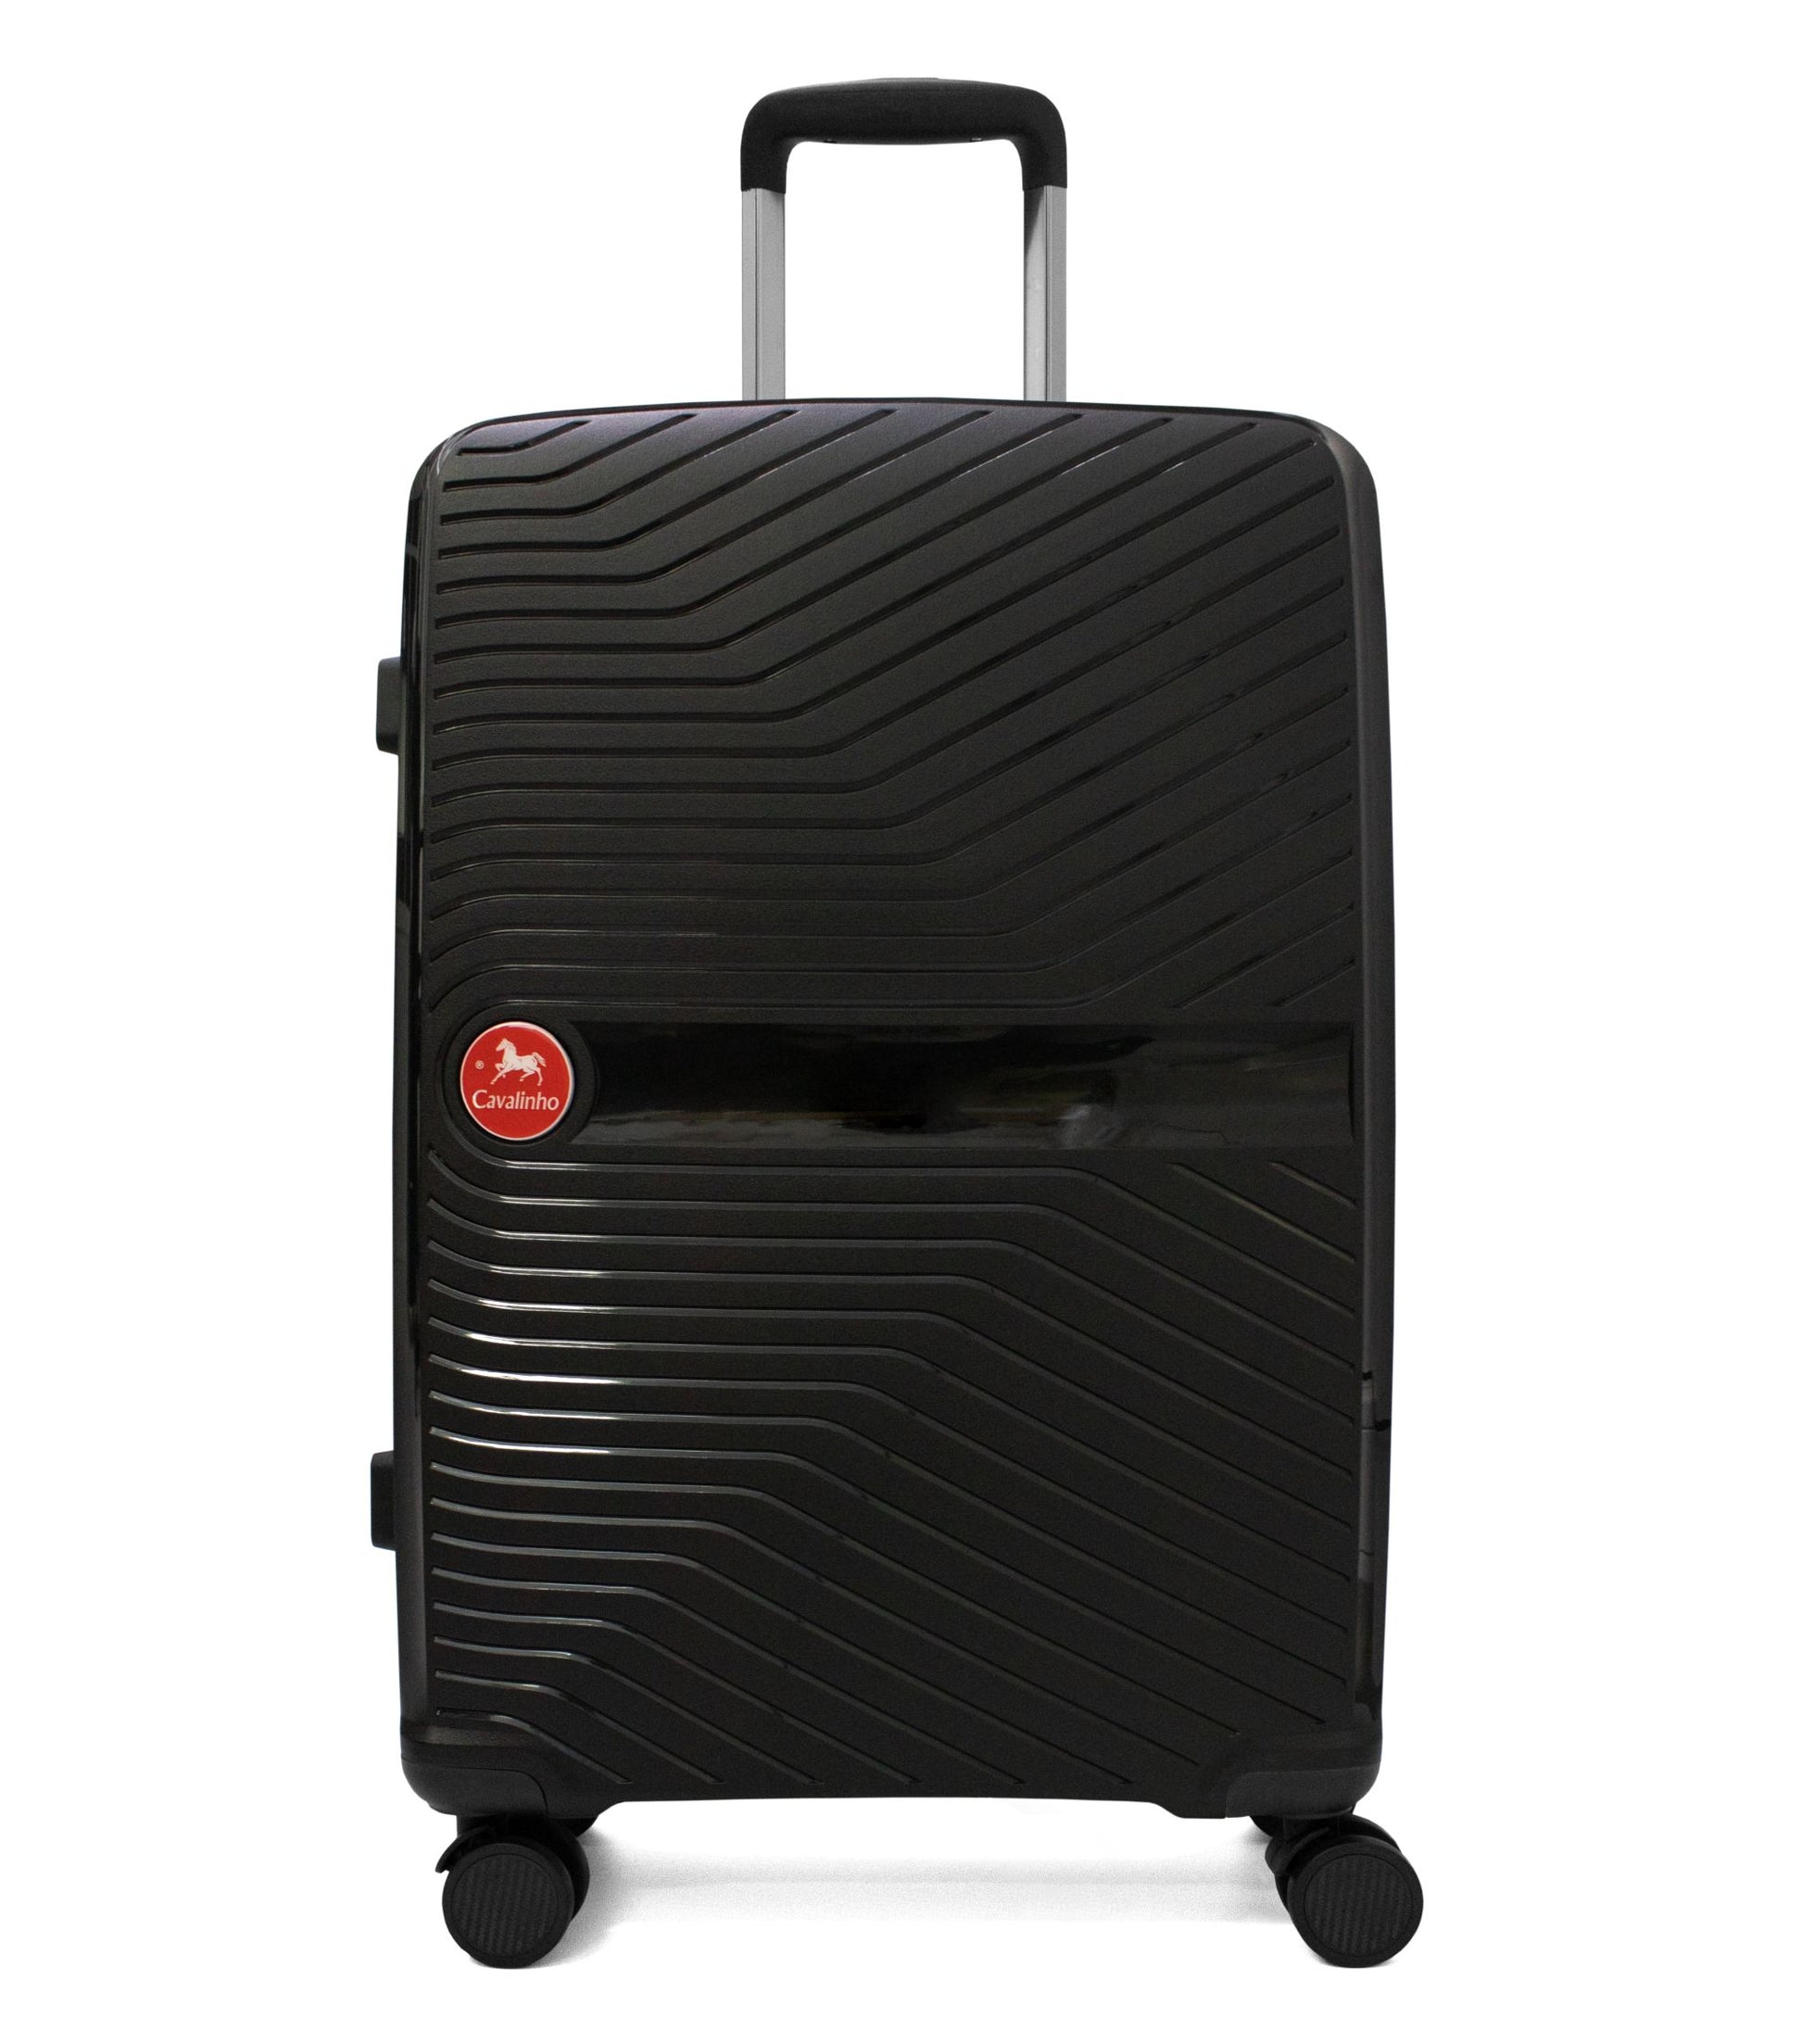 Cavalinho Colorful Check-in Hardside Luggage (24") - 24 inch Black - 68020004.01.24_1